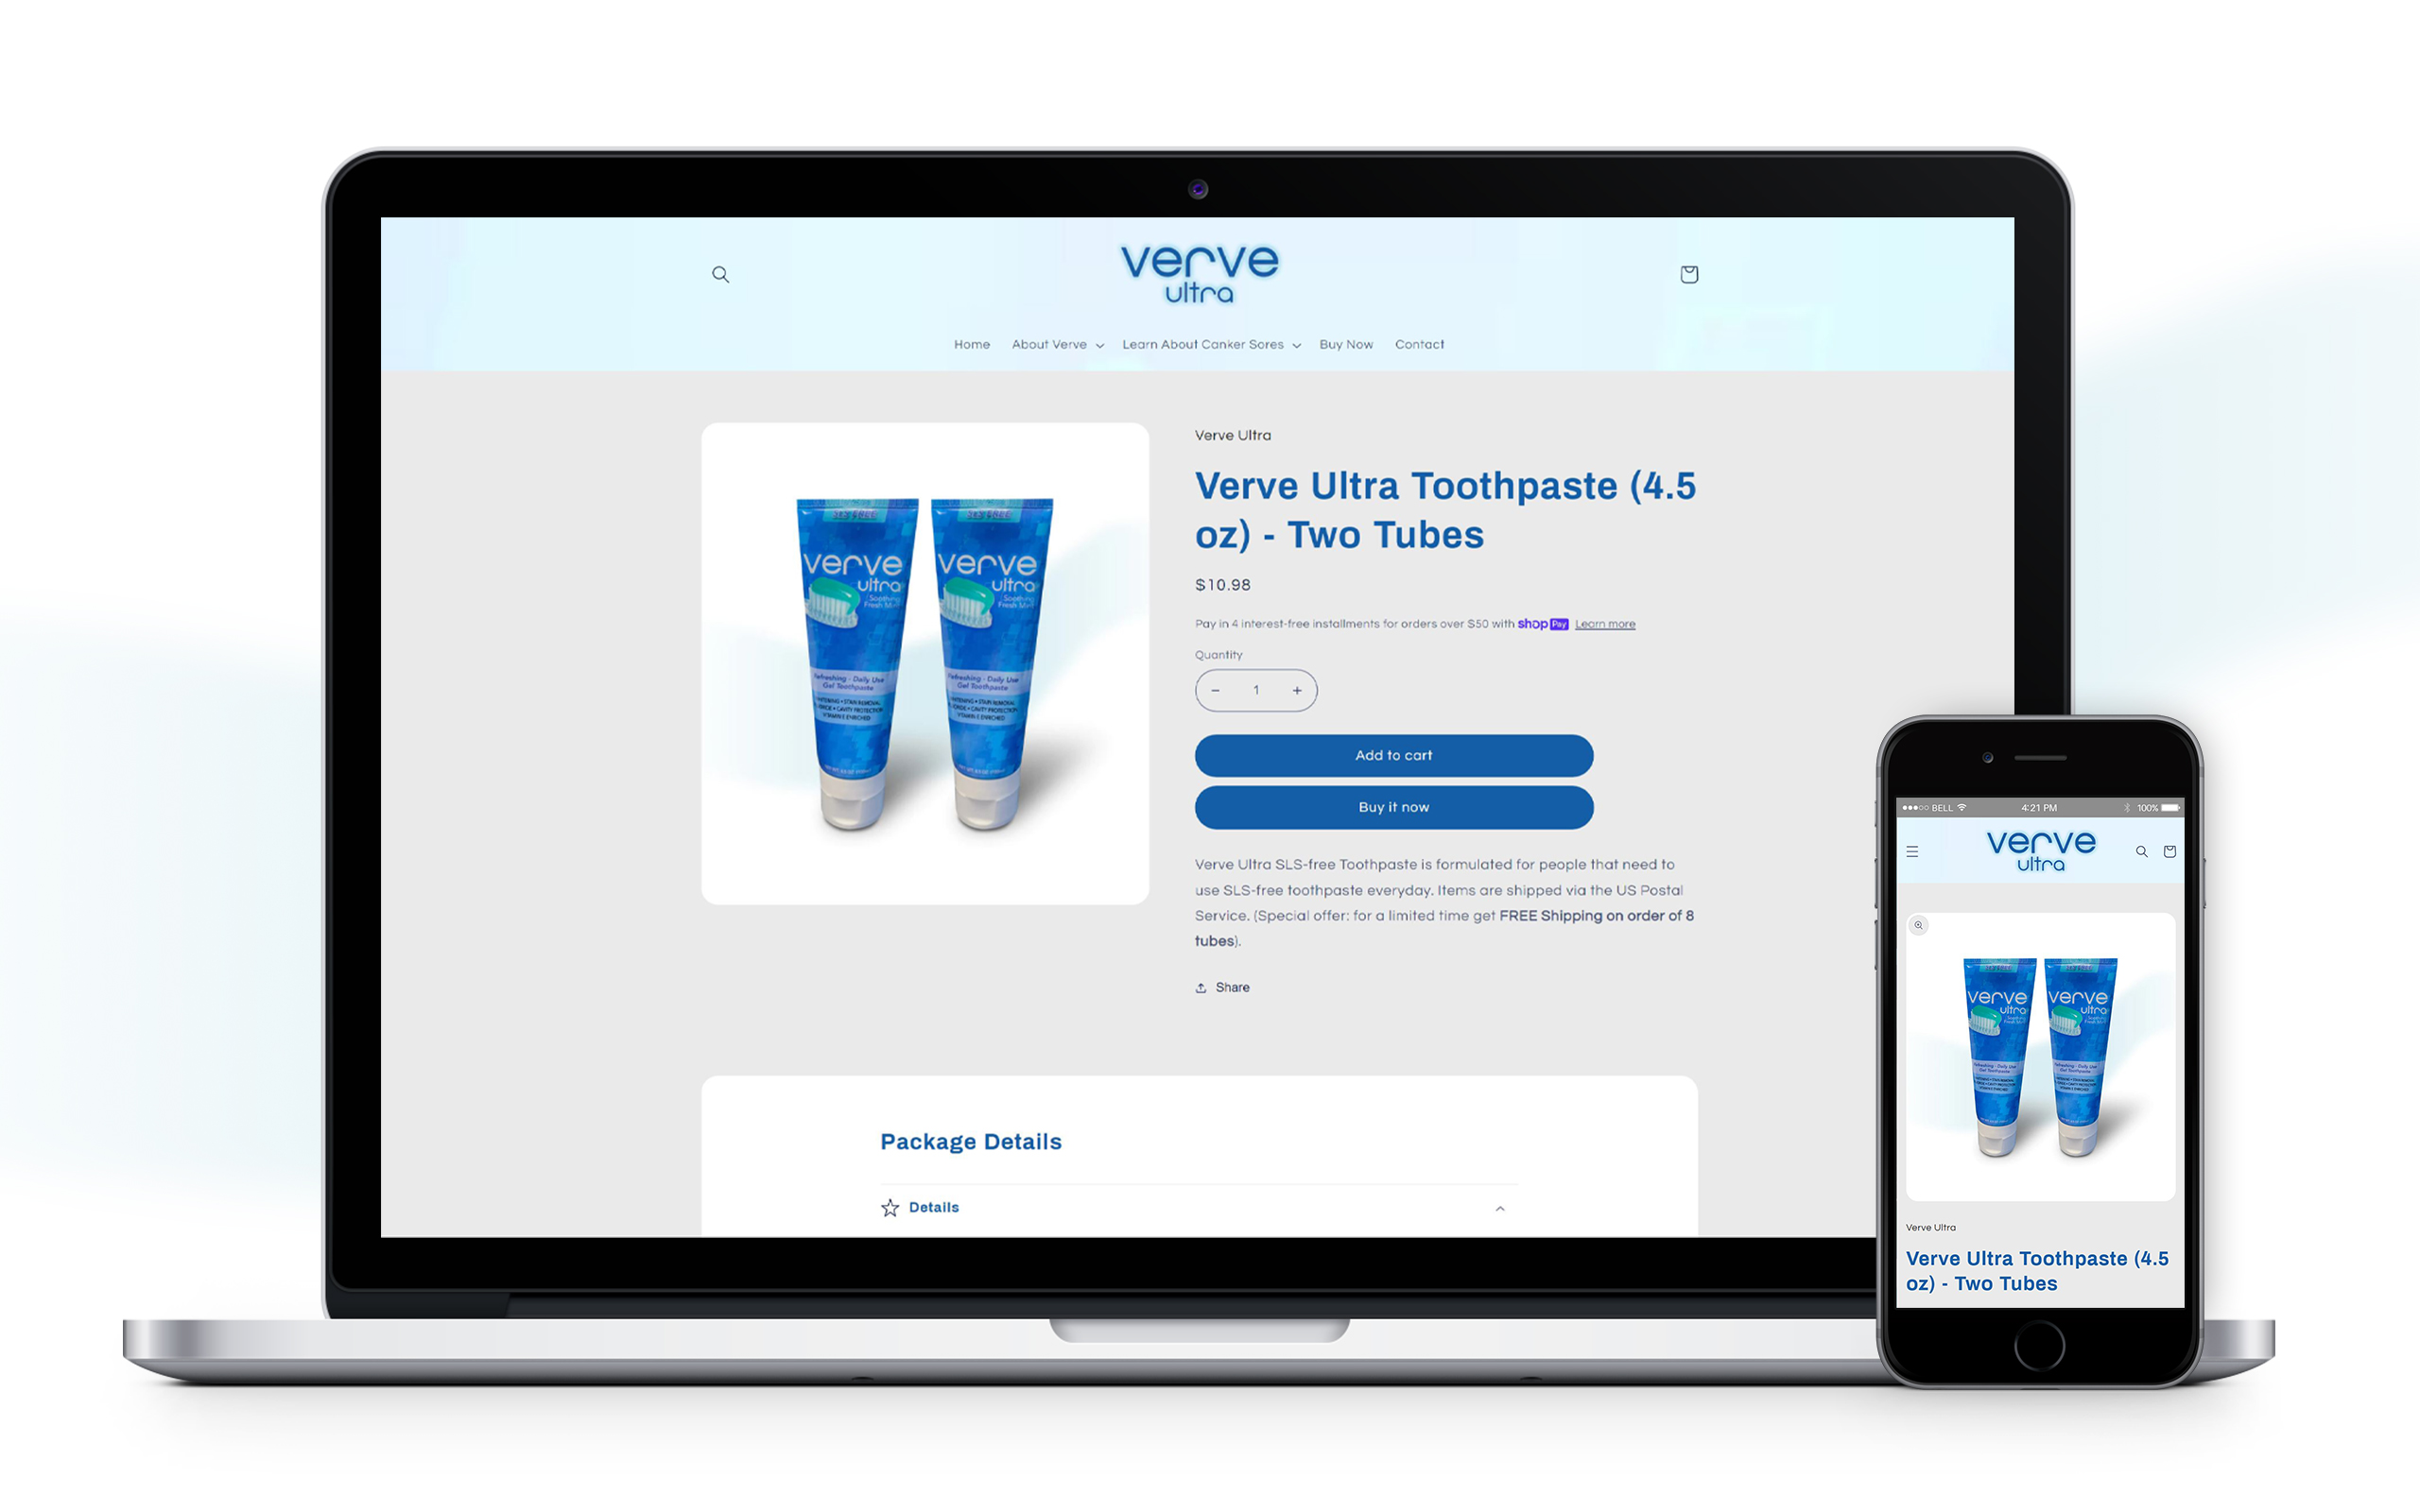 Verve Ultra Toothpaste Website Product Page